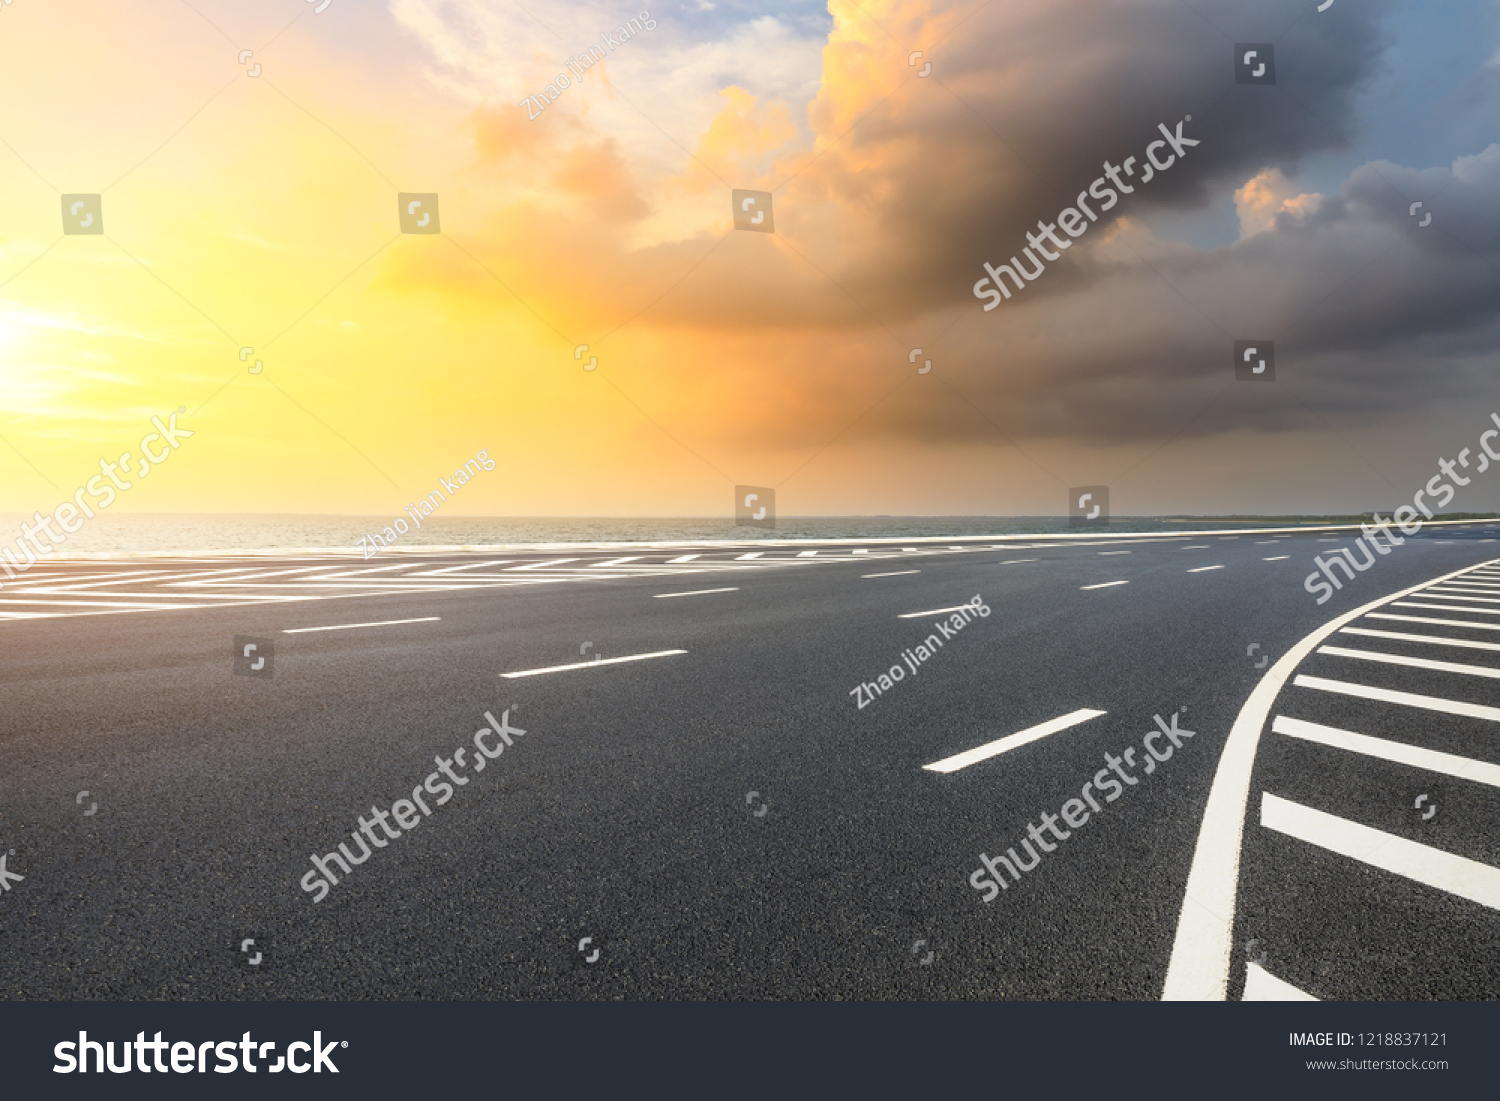 Asphalt road and dramatic sky with coastline at sunset #1218837121